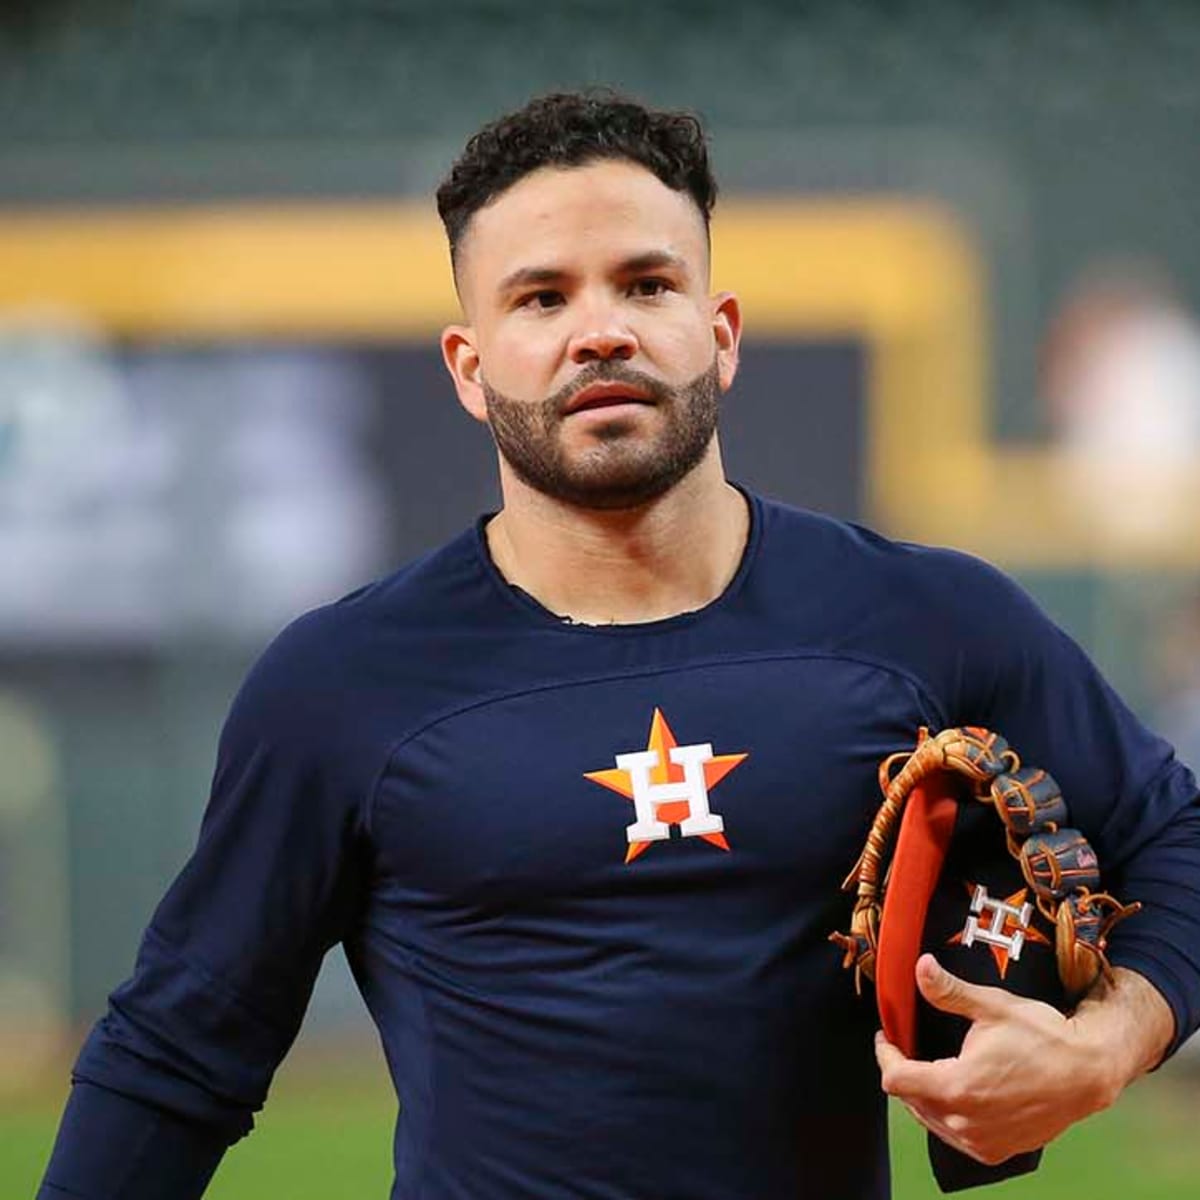 Jose Altuve exposes 'terrible' tattoo after ALCS buzzer rumors - Sports Illustrated